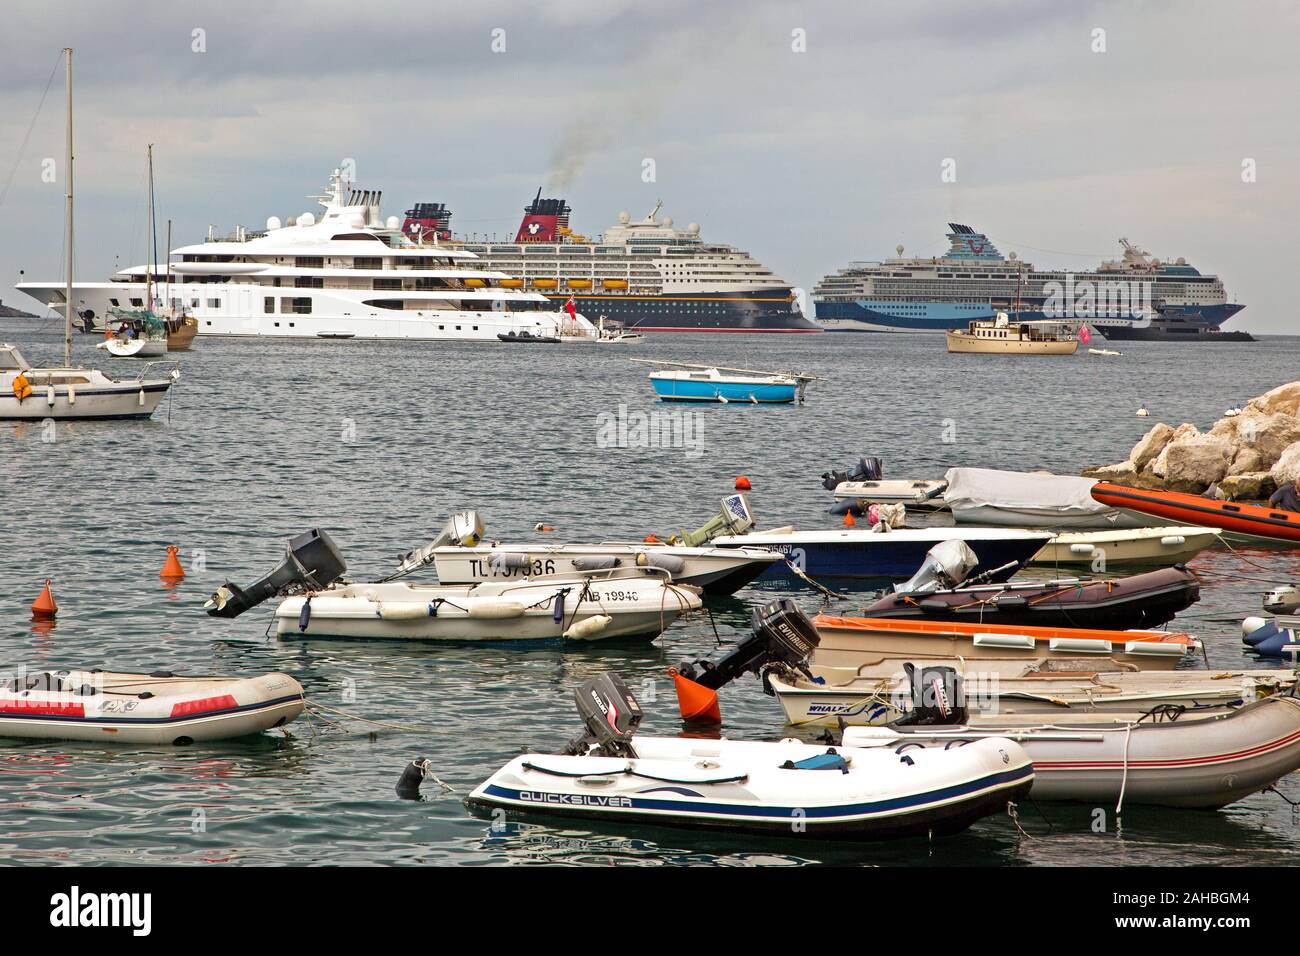 Small zodiacs on the foreshore with private yacht Quantum Blue, Disney Cruise ship Magic and cruise ship Marella Blue in the background in the harbour Stock Photo